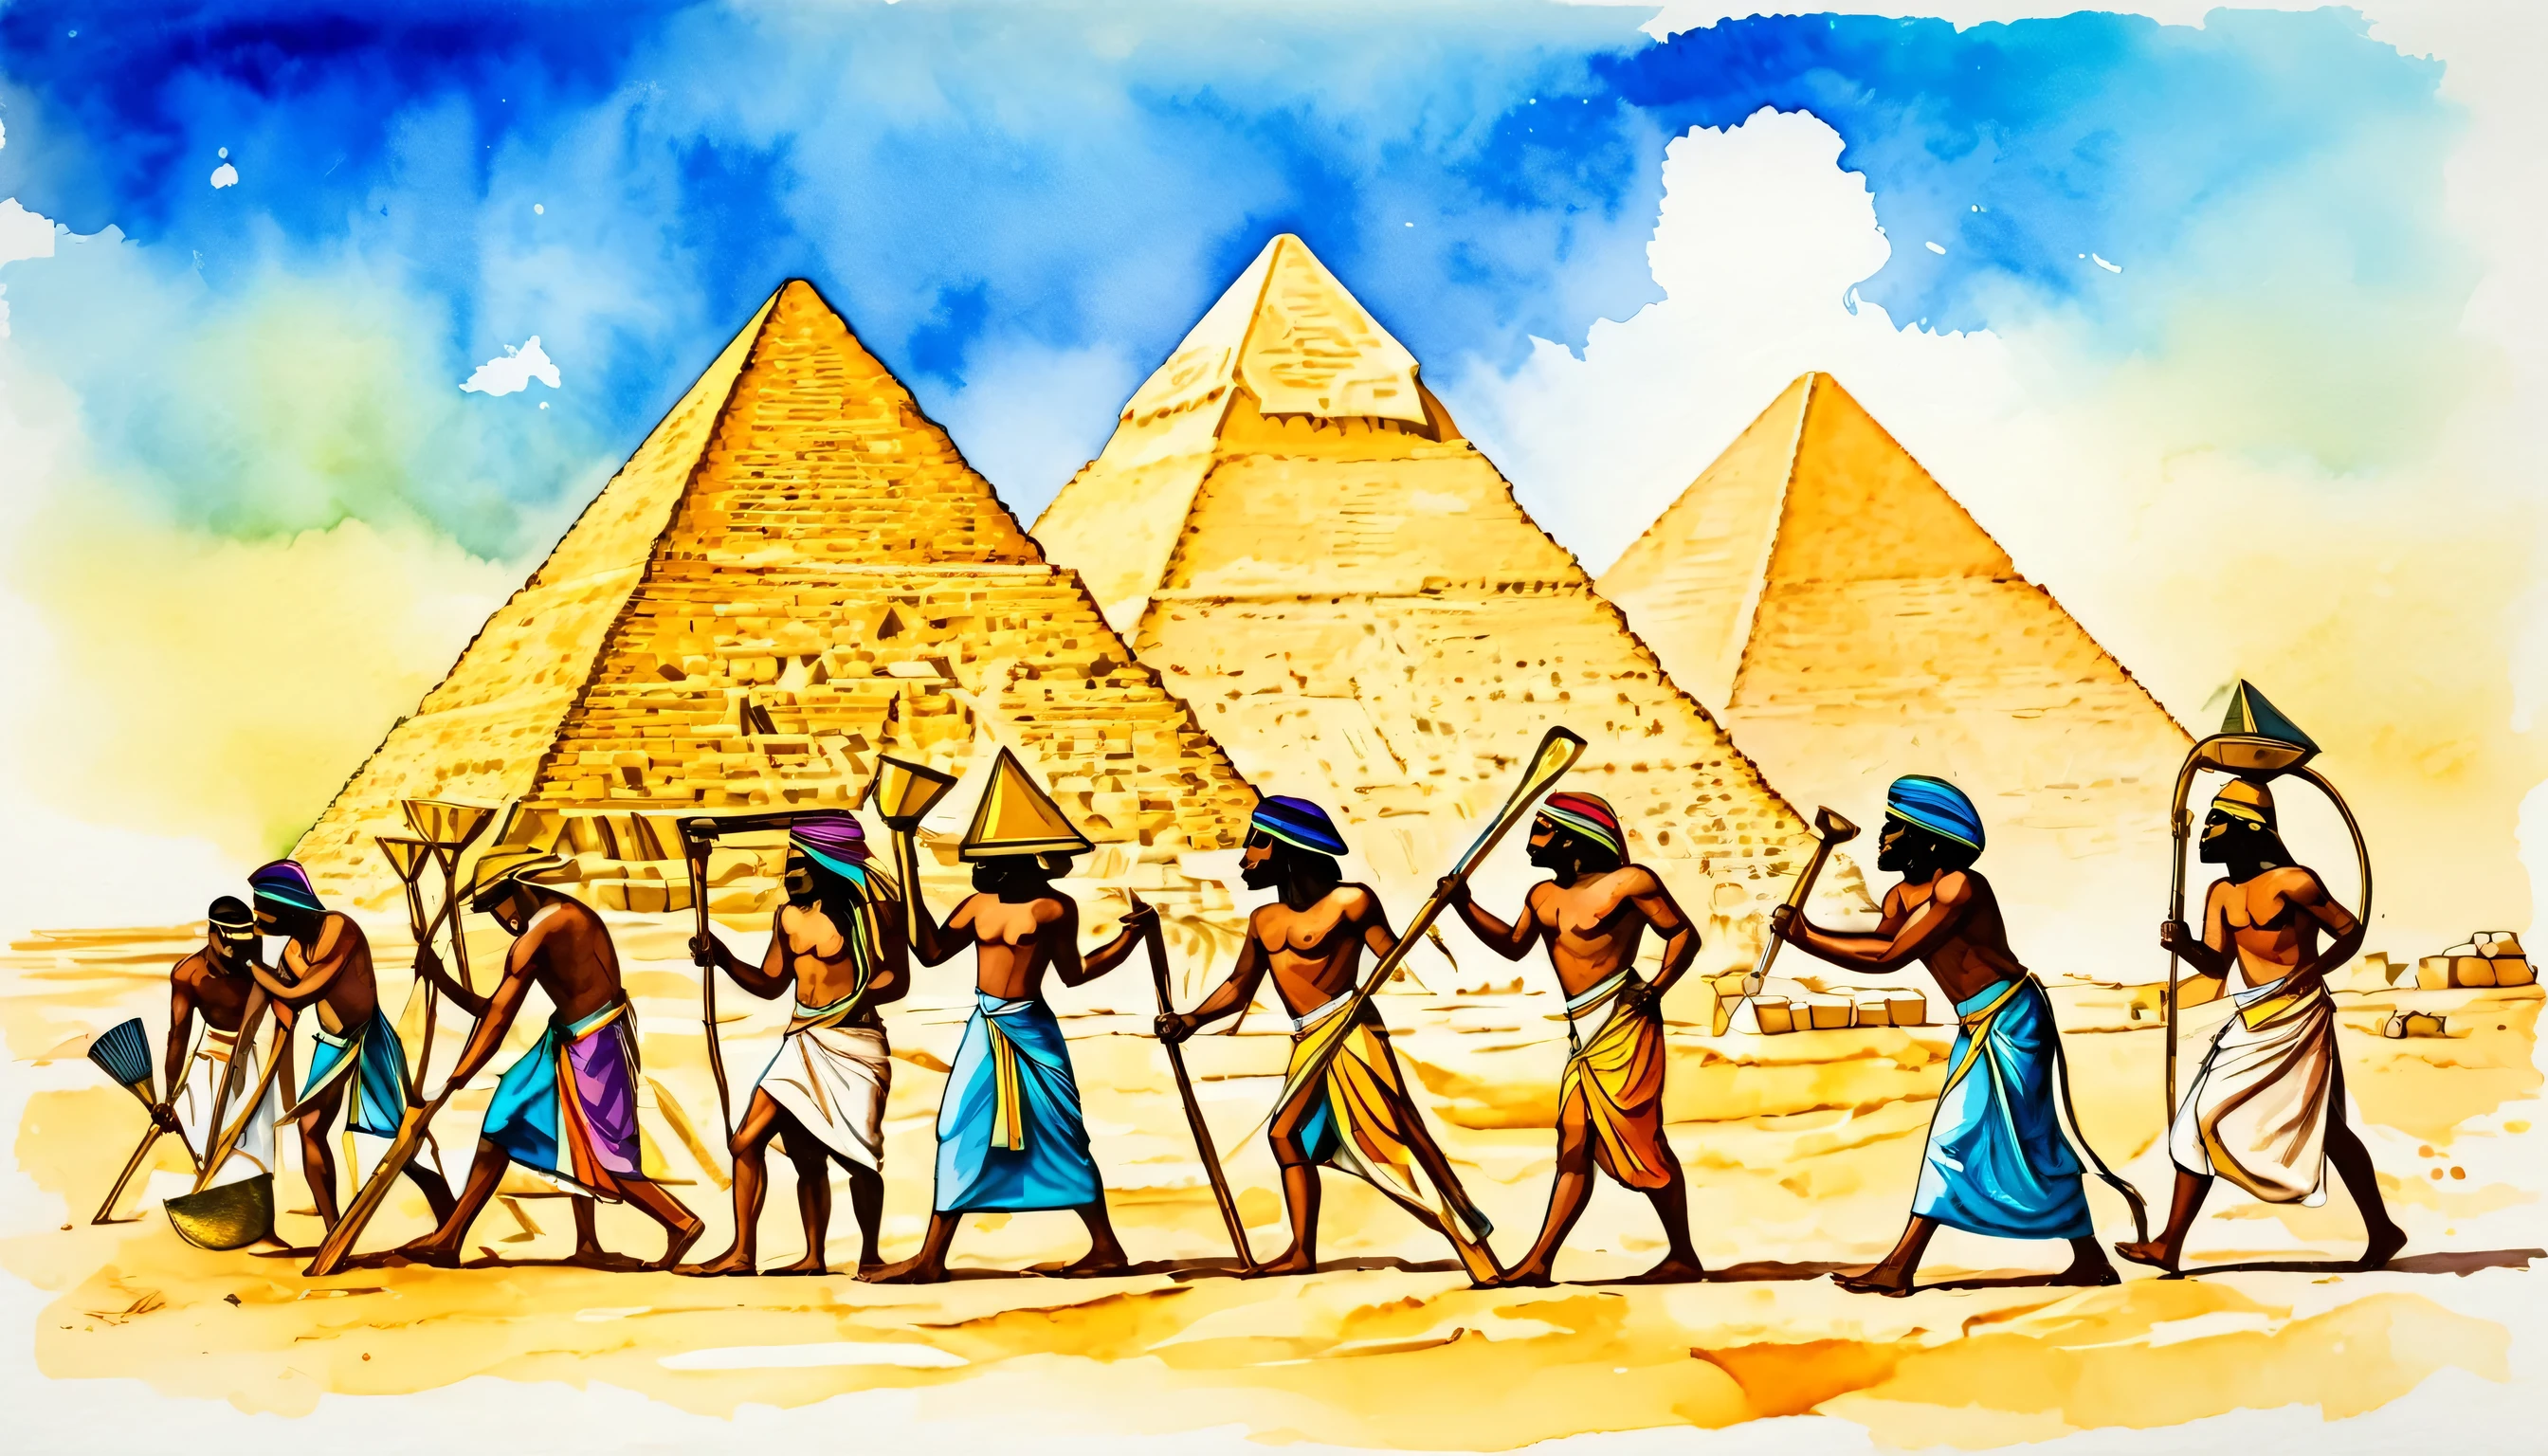 ancient Egypt, slaves building pyramids, slaves holding work tools, modern art, painting, drawing, watercolor, psychedelic colors